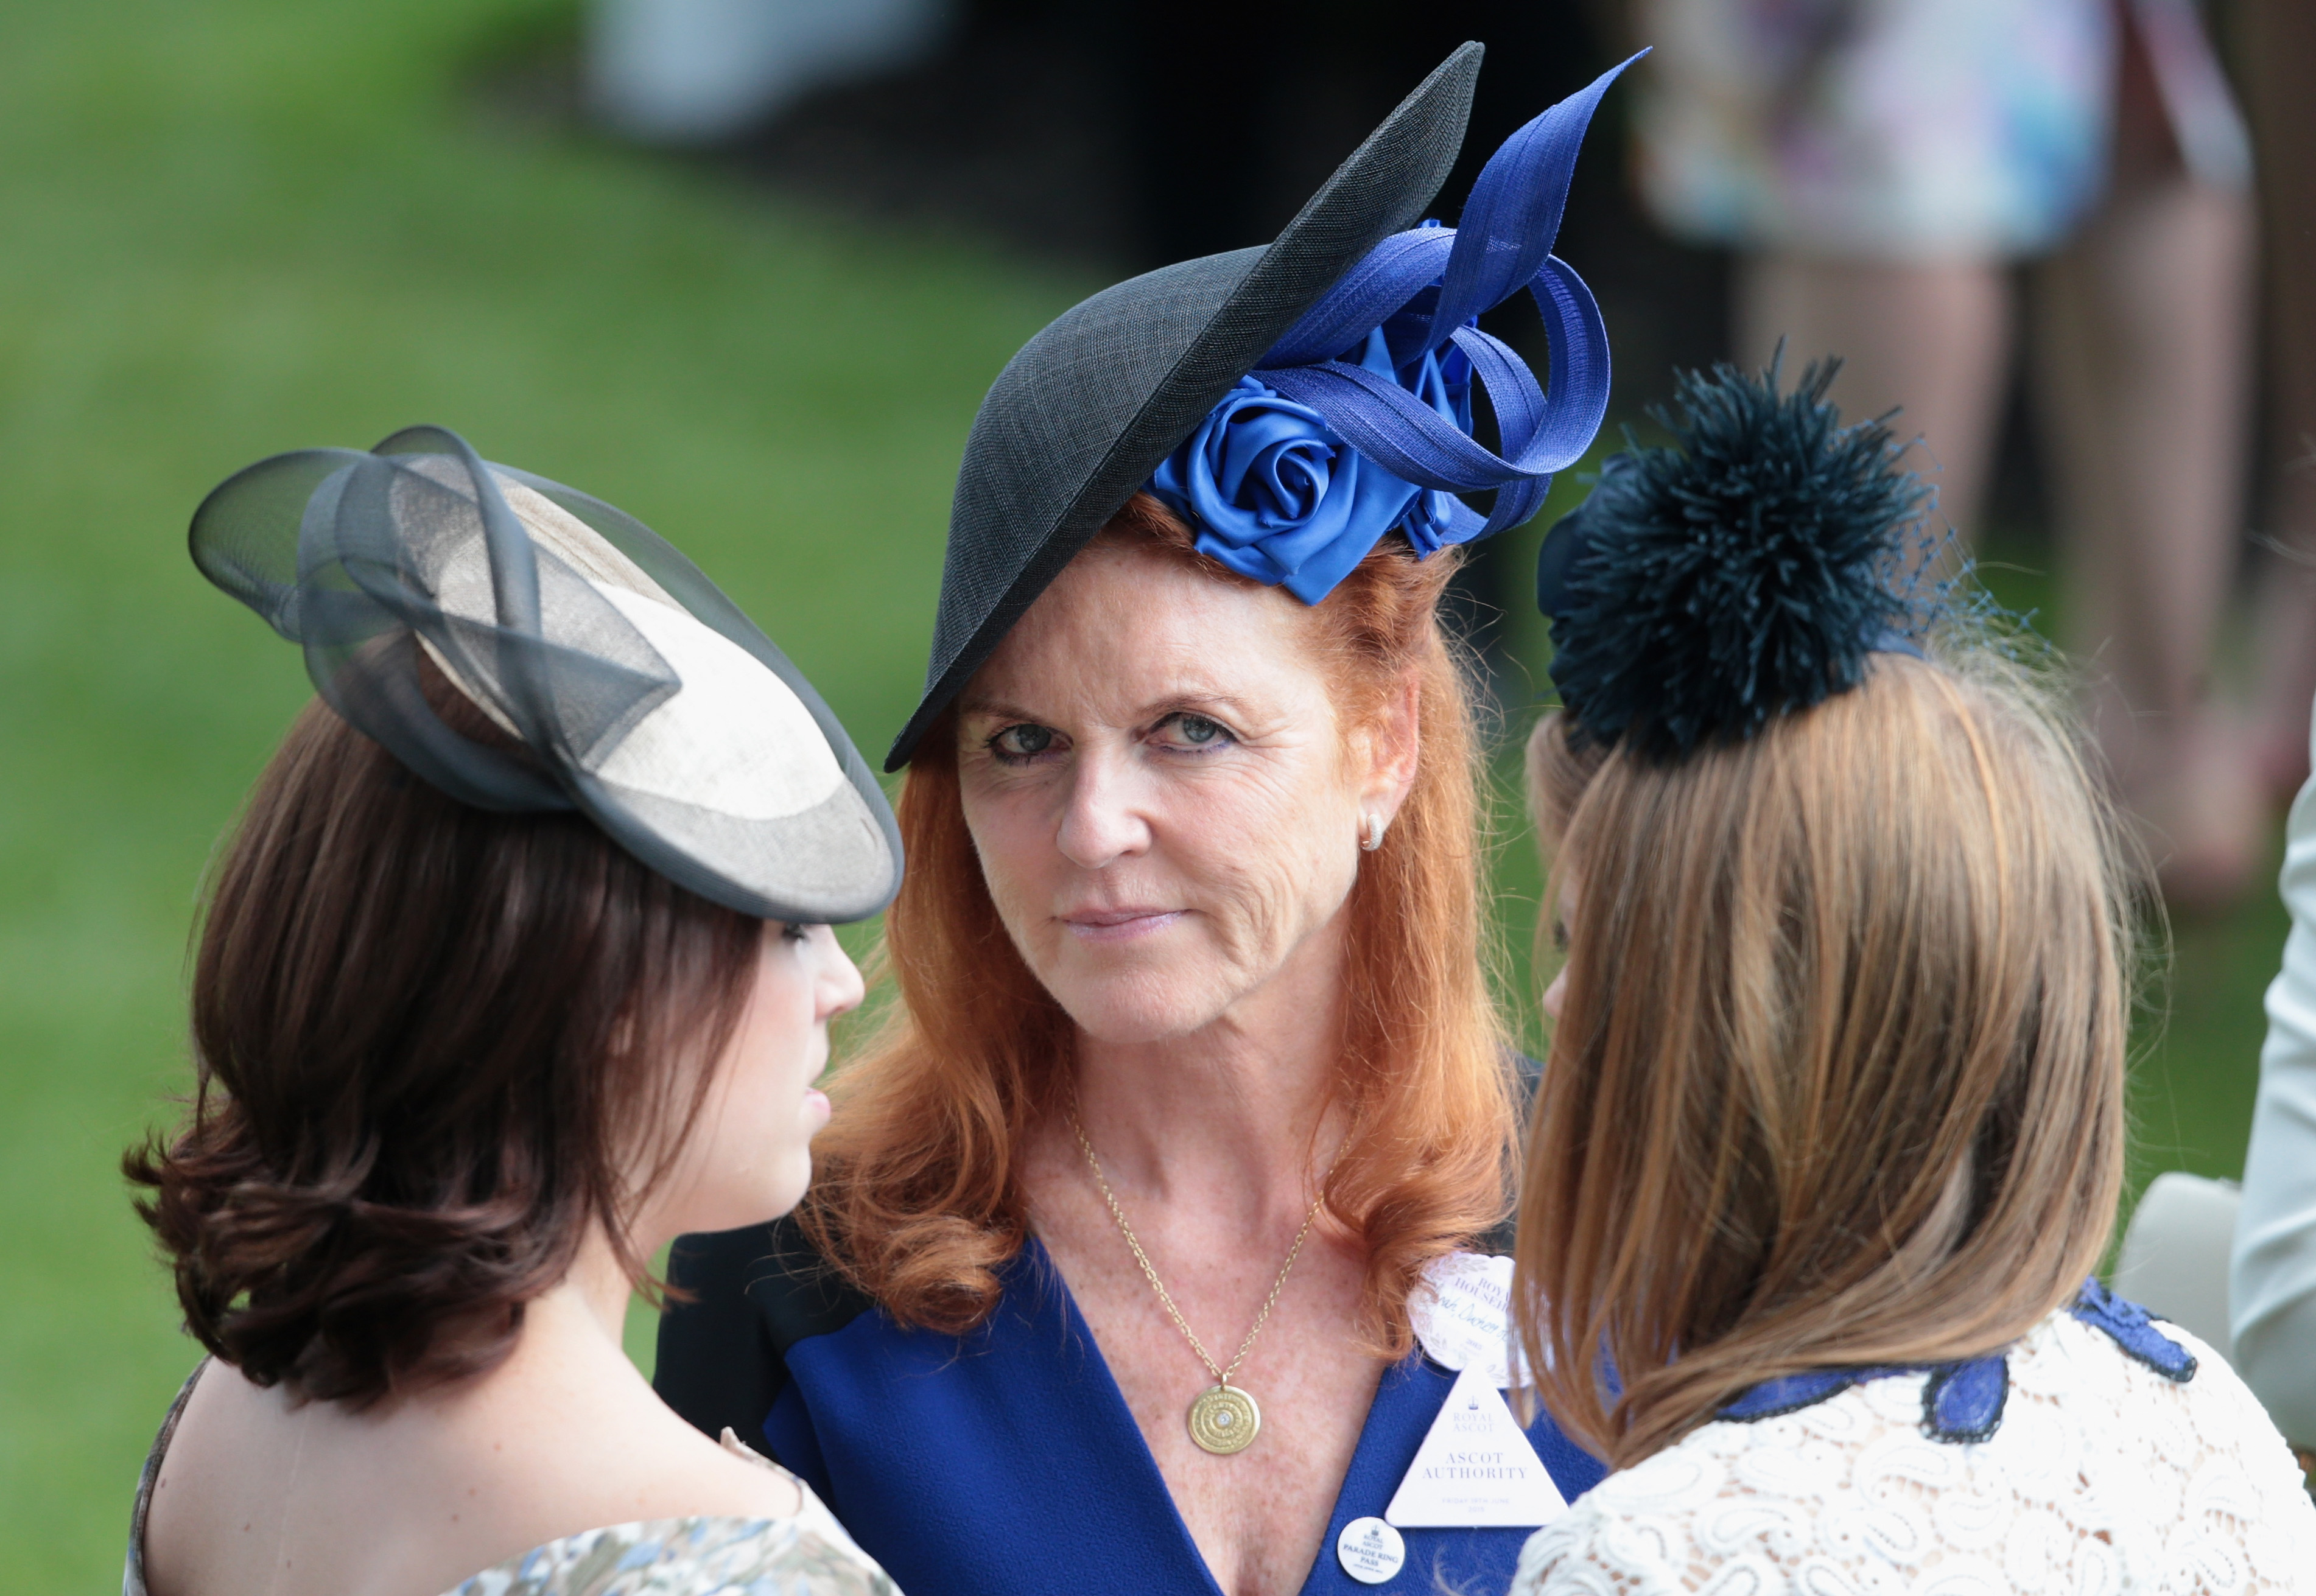 Princess Eugenie, Sarah Ferguson, and Princess Beatrice standing together in the parade ring of Royal Ascot